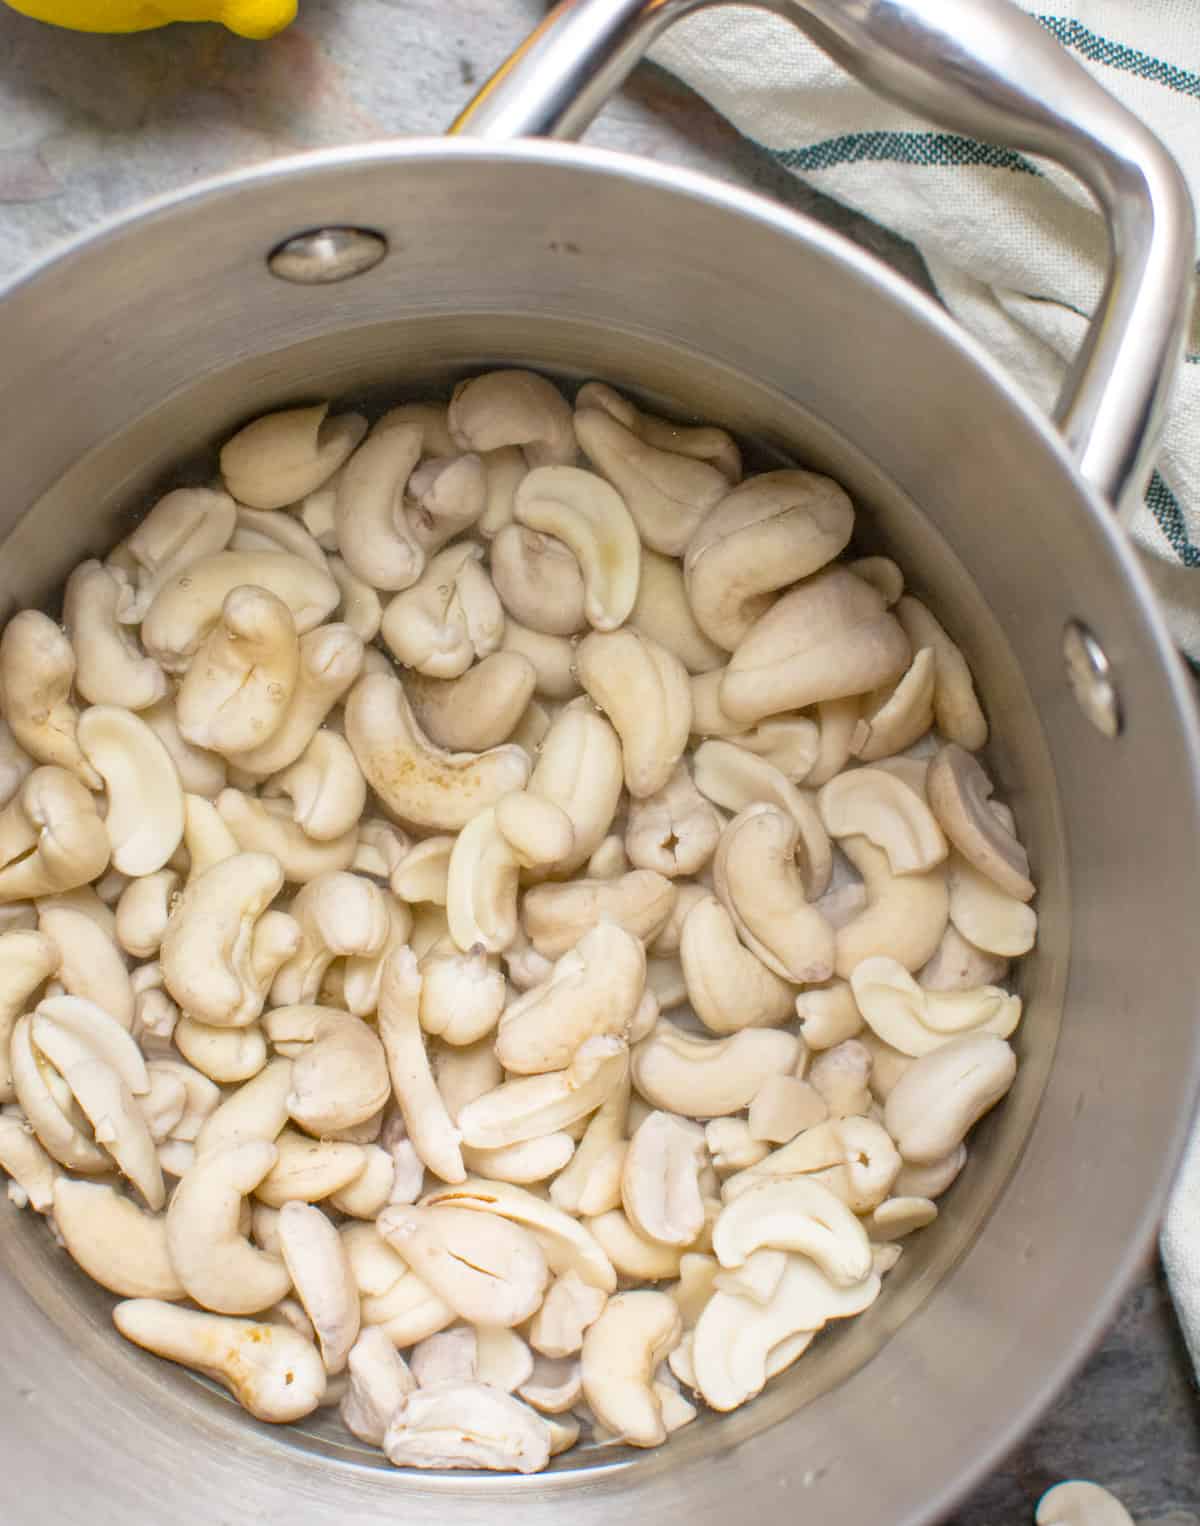 A stainless steel saucepan with cashews soaking in hot water.